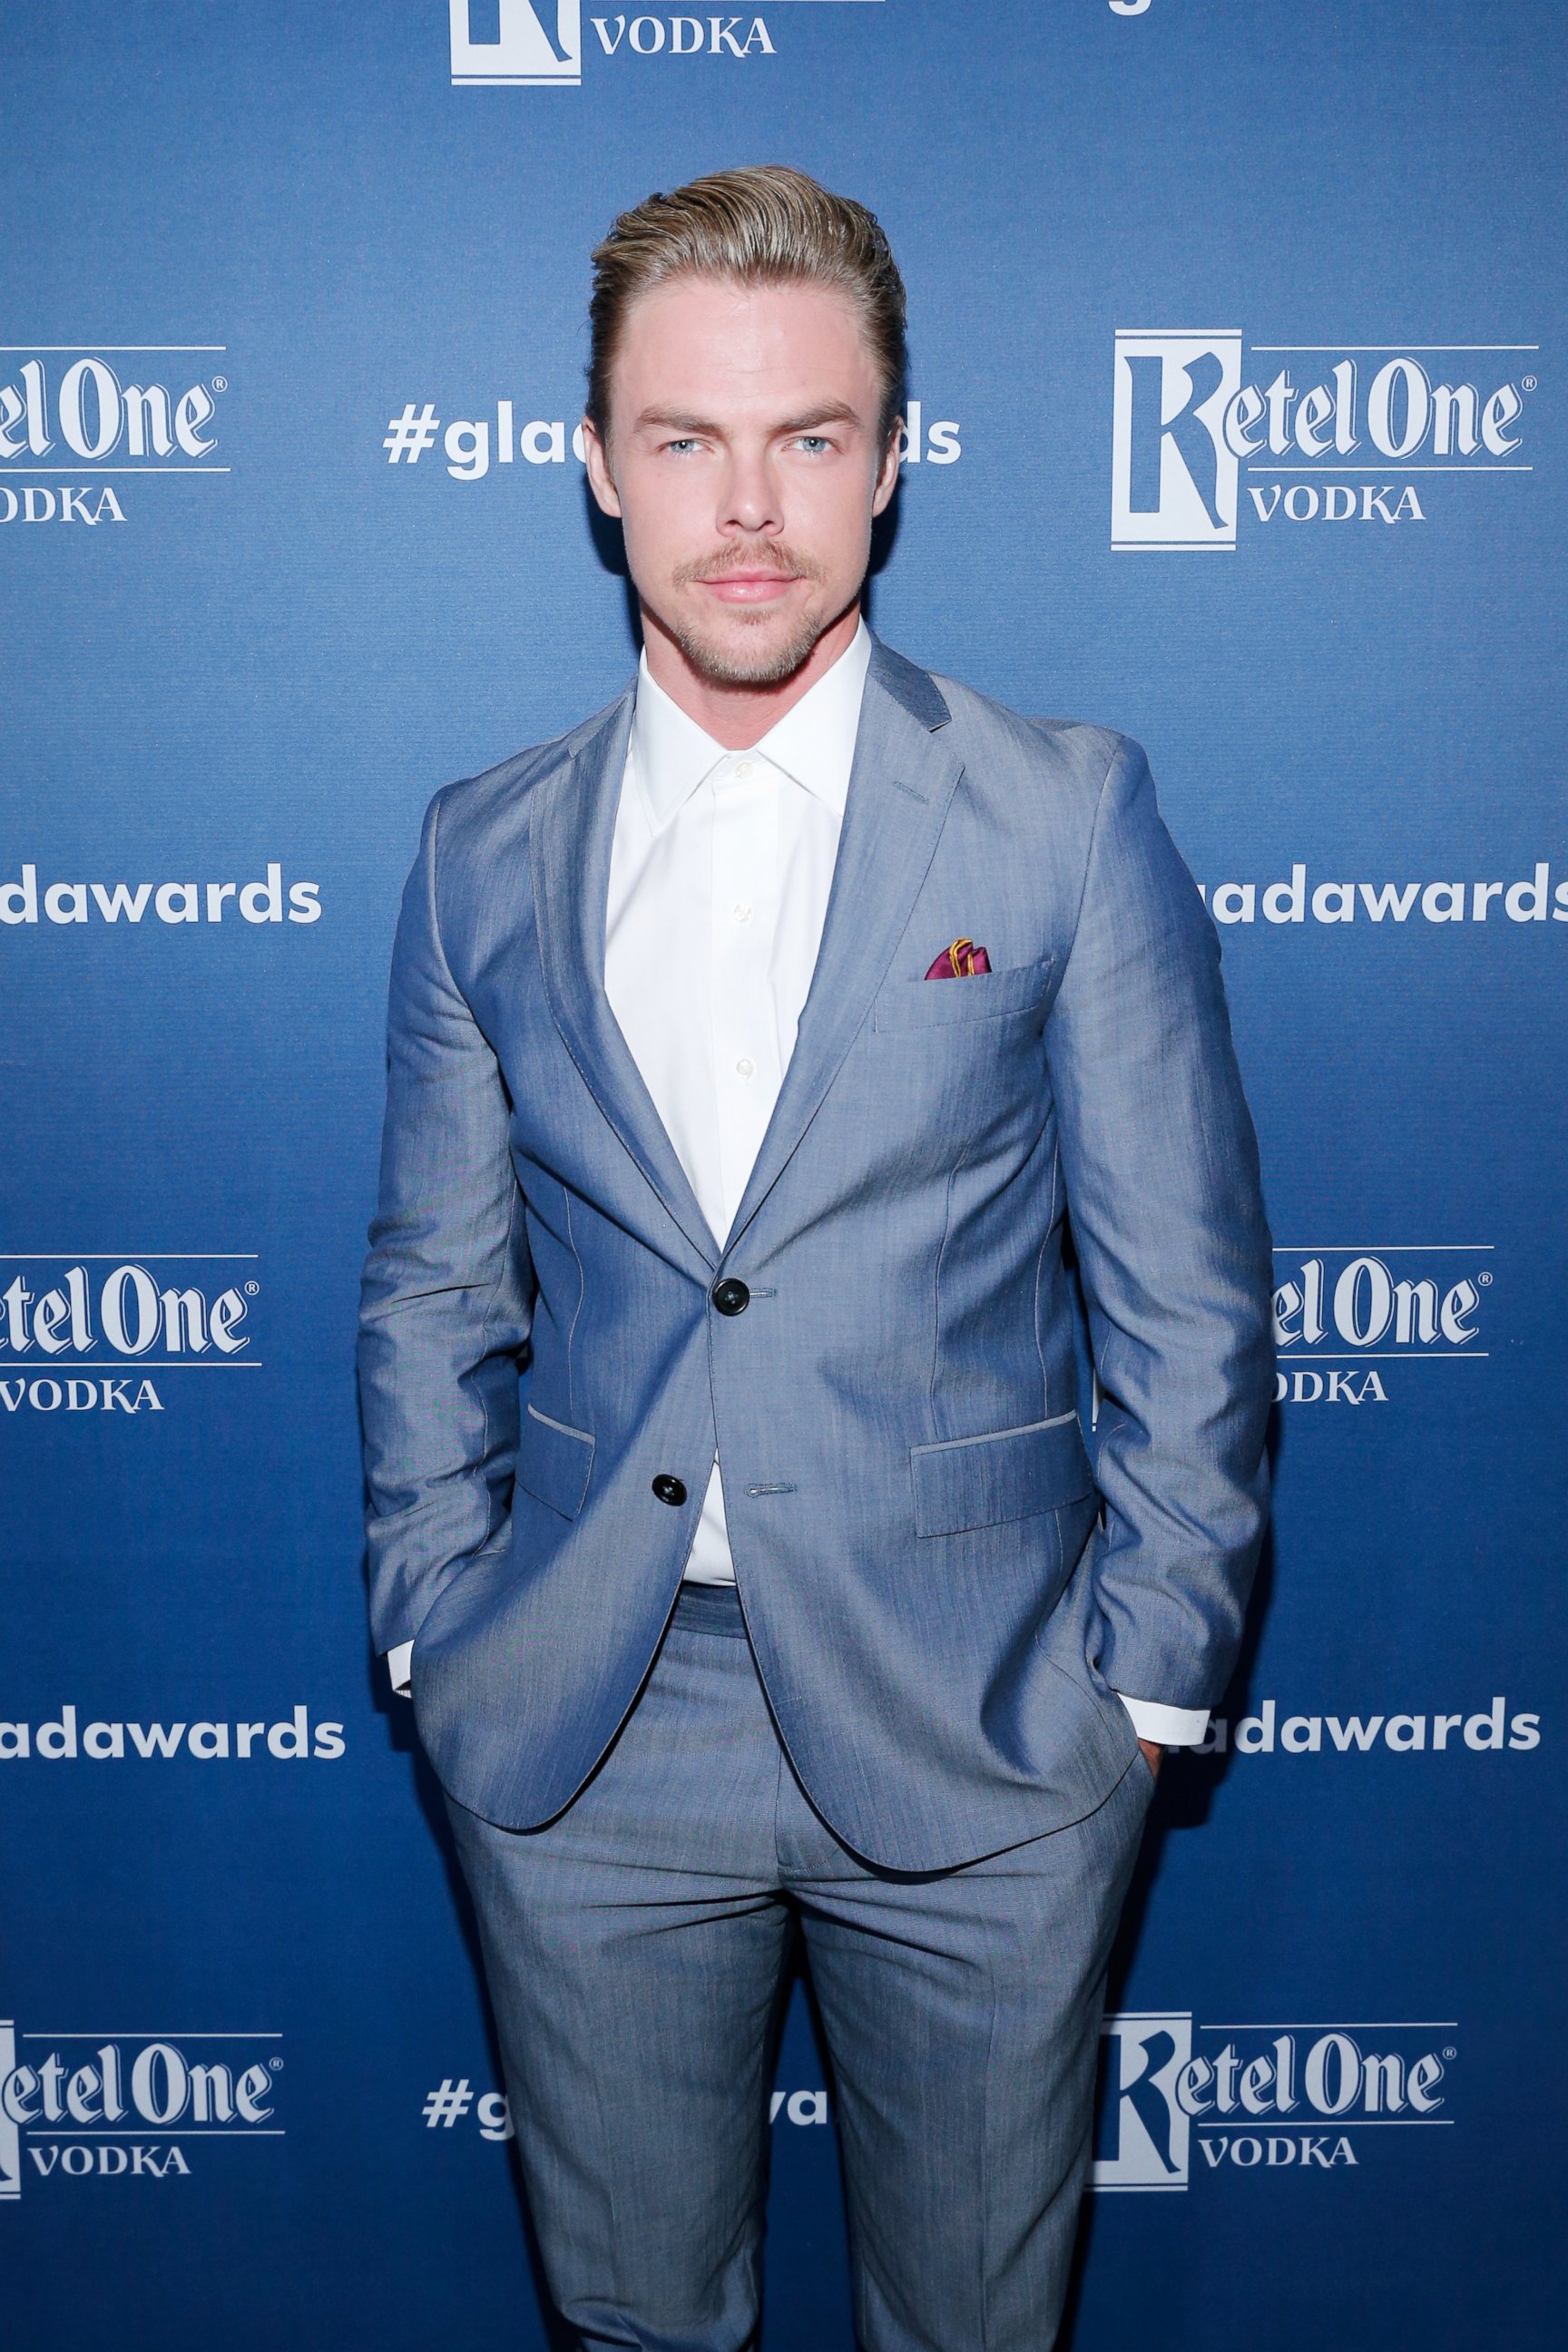 PHOTO: Derek Hough attends the 27th Annual GLAAD Media Awards hosted by Ketel One Vodka at the Beverly Hilton, April 2, 2016 in Beverly Hills, Calif.  